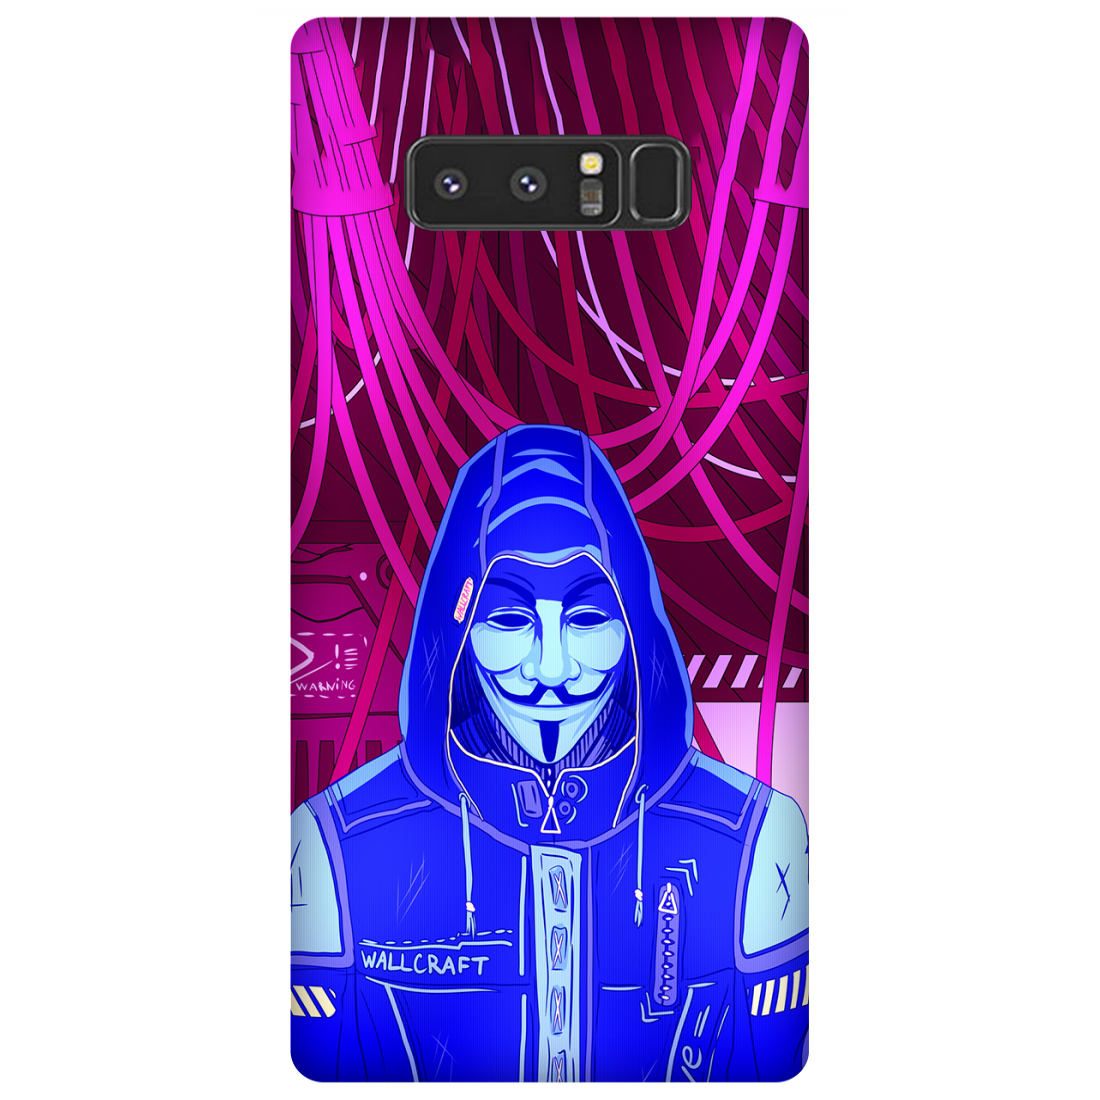 Wrap Craft Anonymous Case Samsung Galaxy Note 8